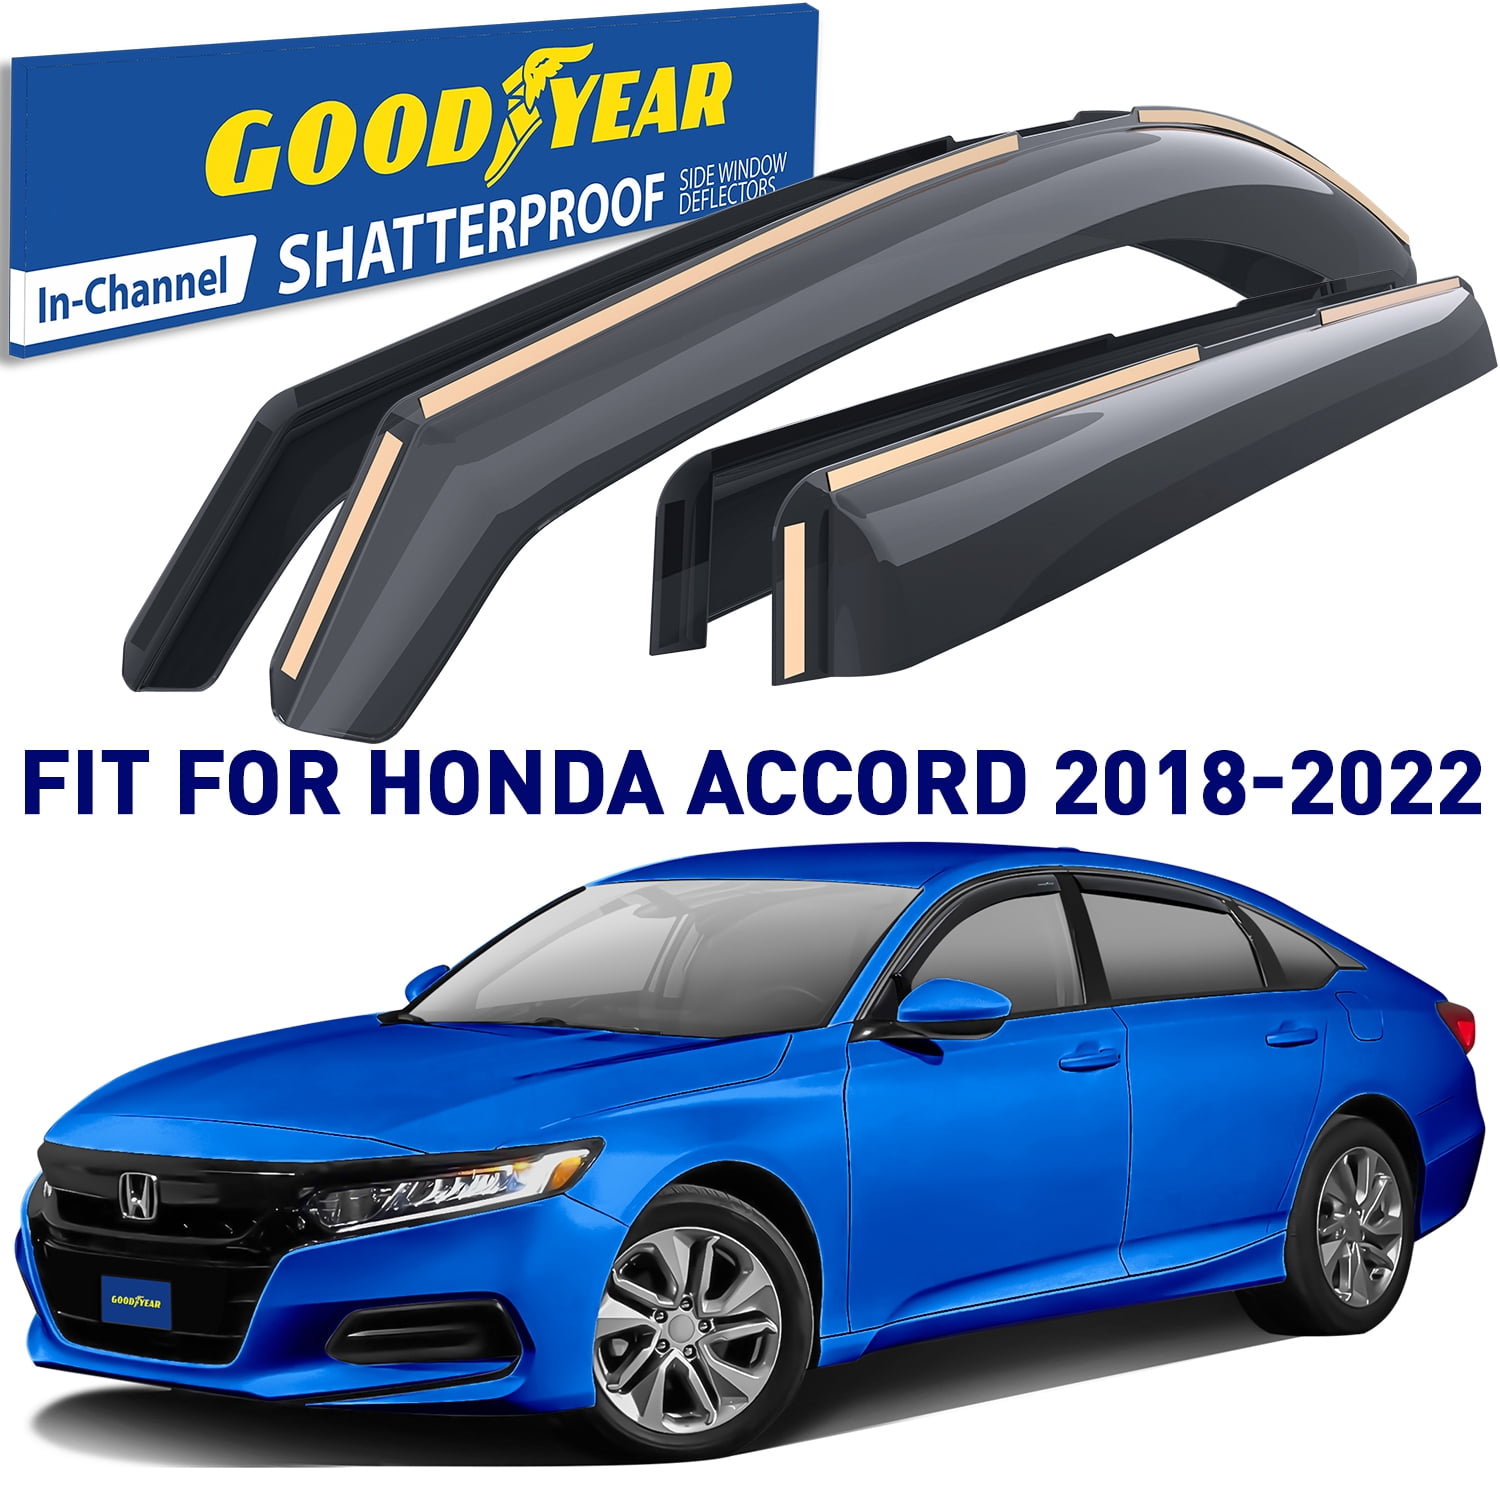 Goodyear Shatterproof in-Channel Window Deflectors for Honda Accord  2018-2022, Rain Guards, Window Visors for Cars, Vent Deflector, Car  Accessories, 4 pcs - GY003491 